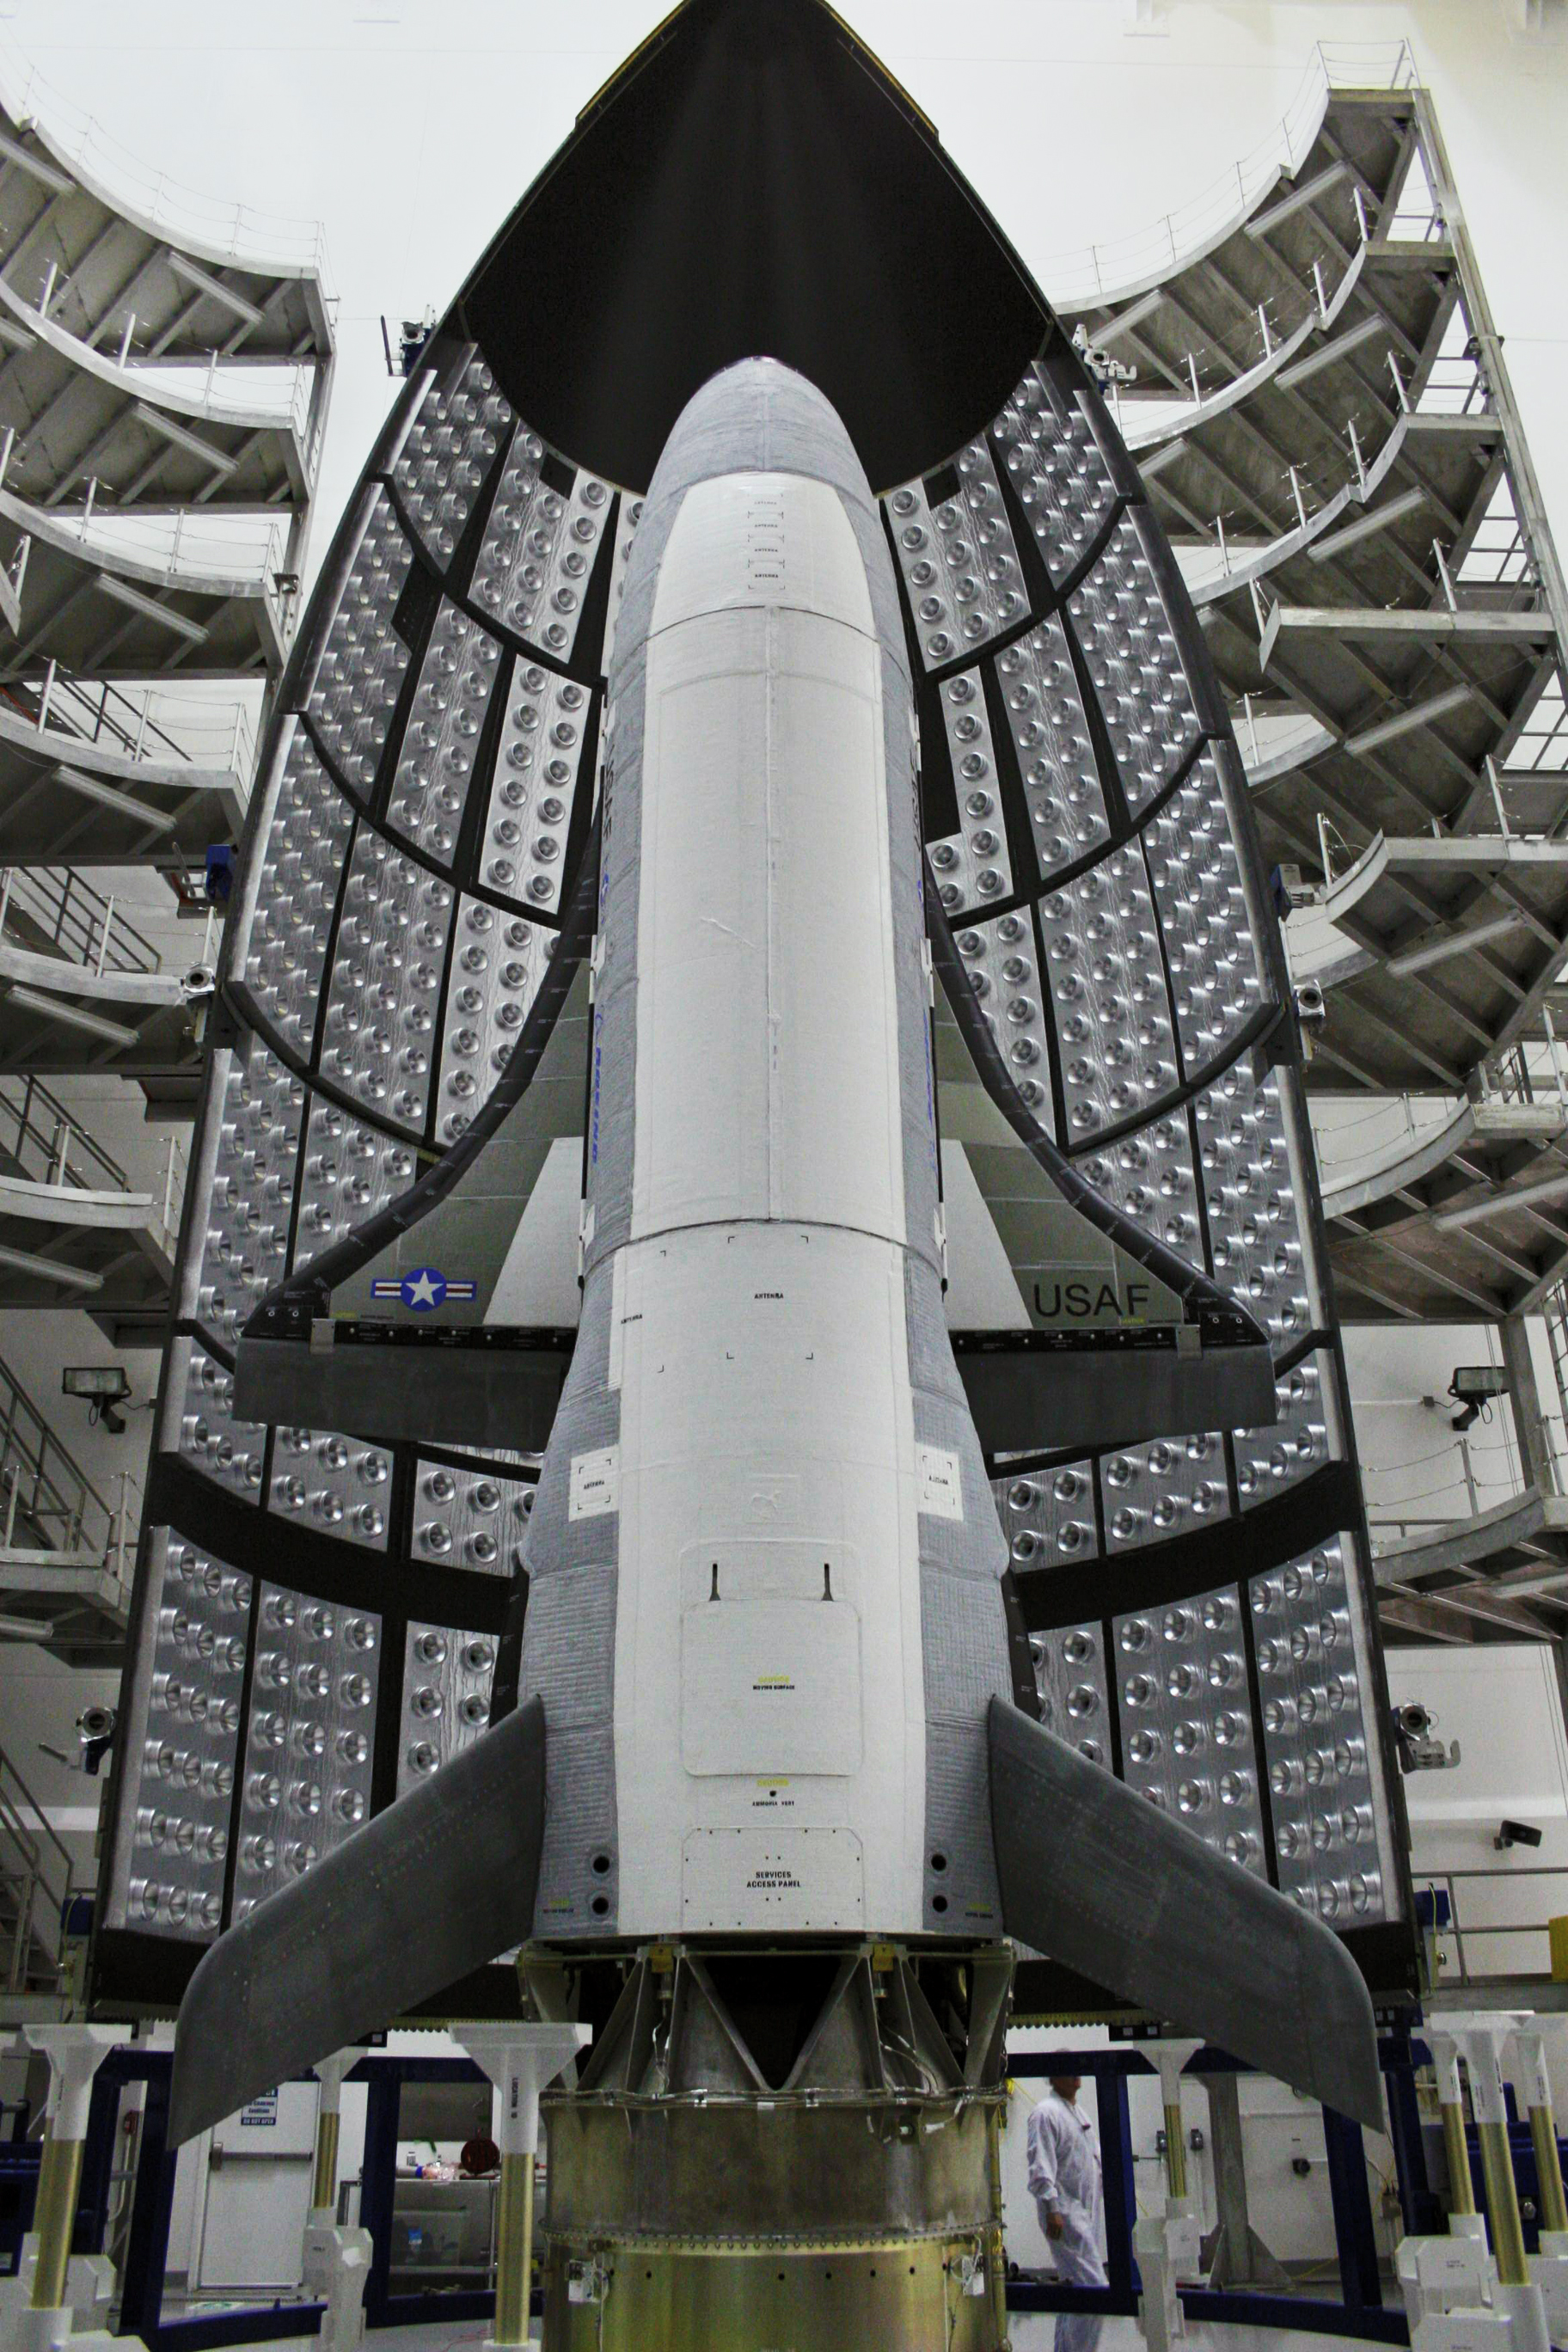 Boeing_X-37B_inside_payload_fairing_before_launch.jpg